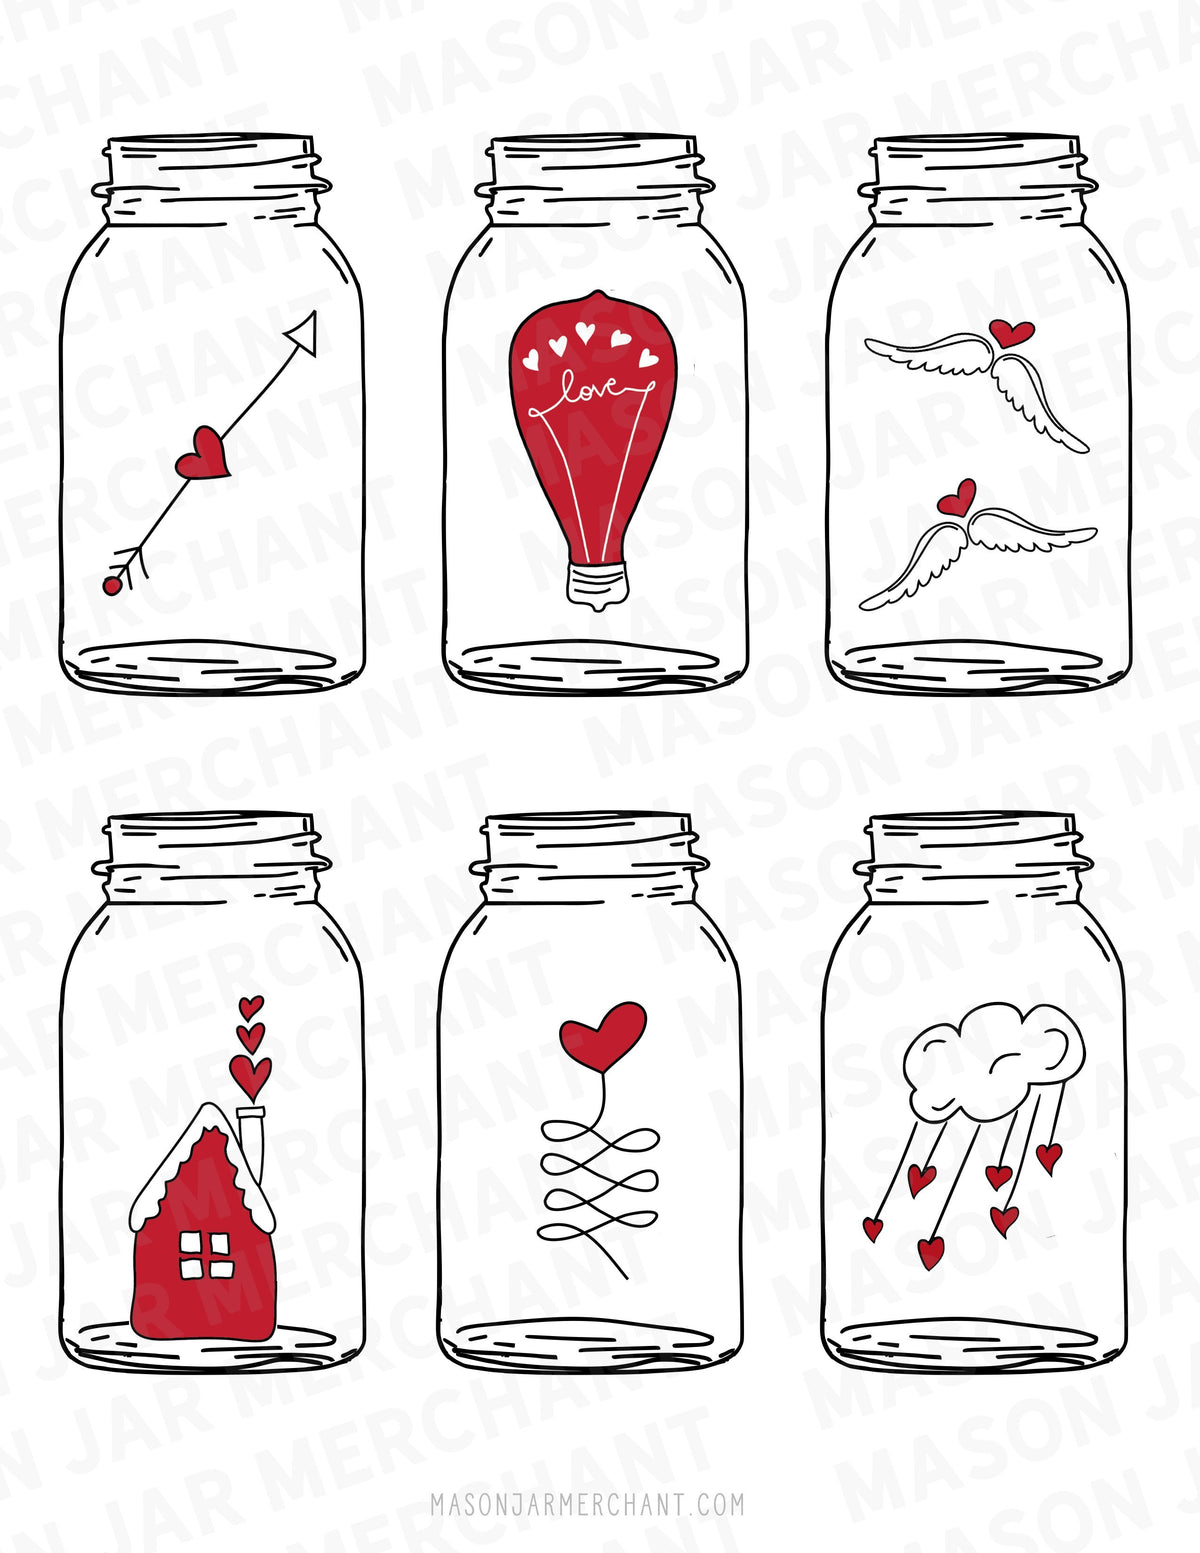 mason jar shaped valentines PDF download and use as gift tags